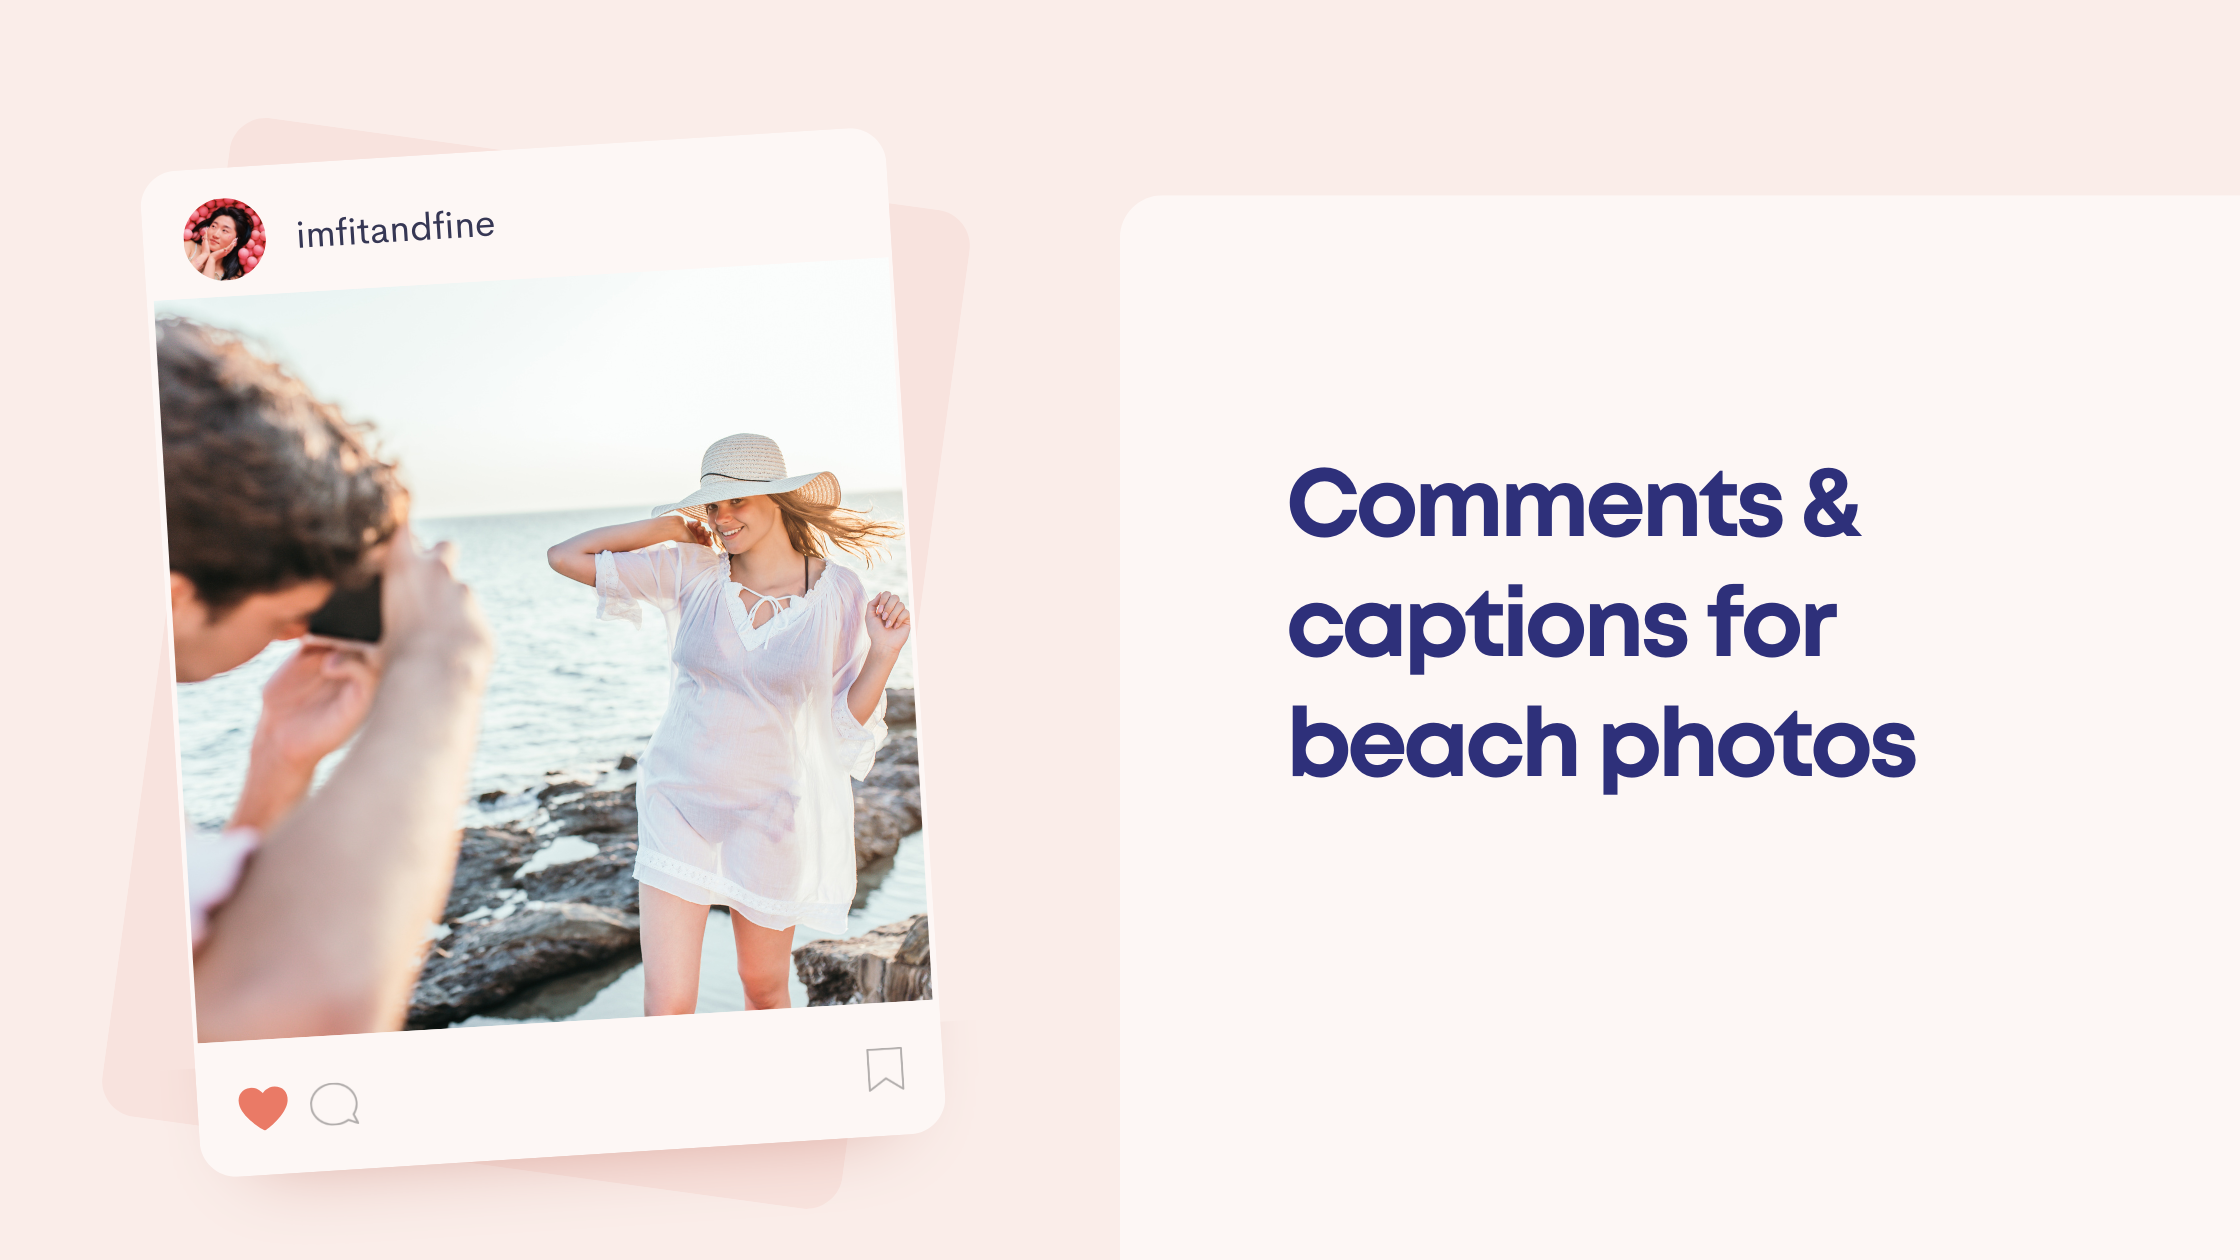 Remote.tools shares a list of comments & captions for beach photos